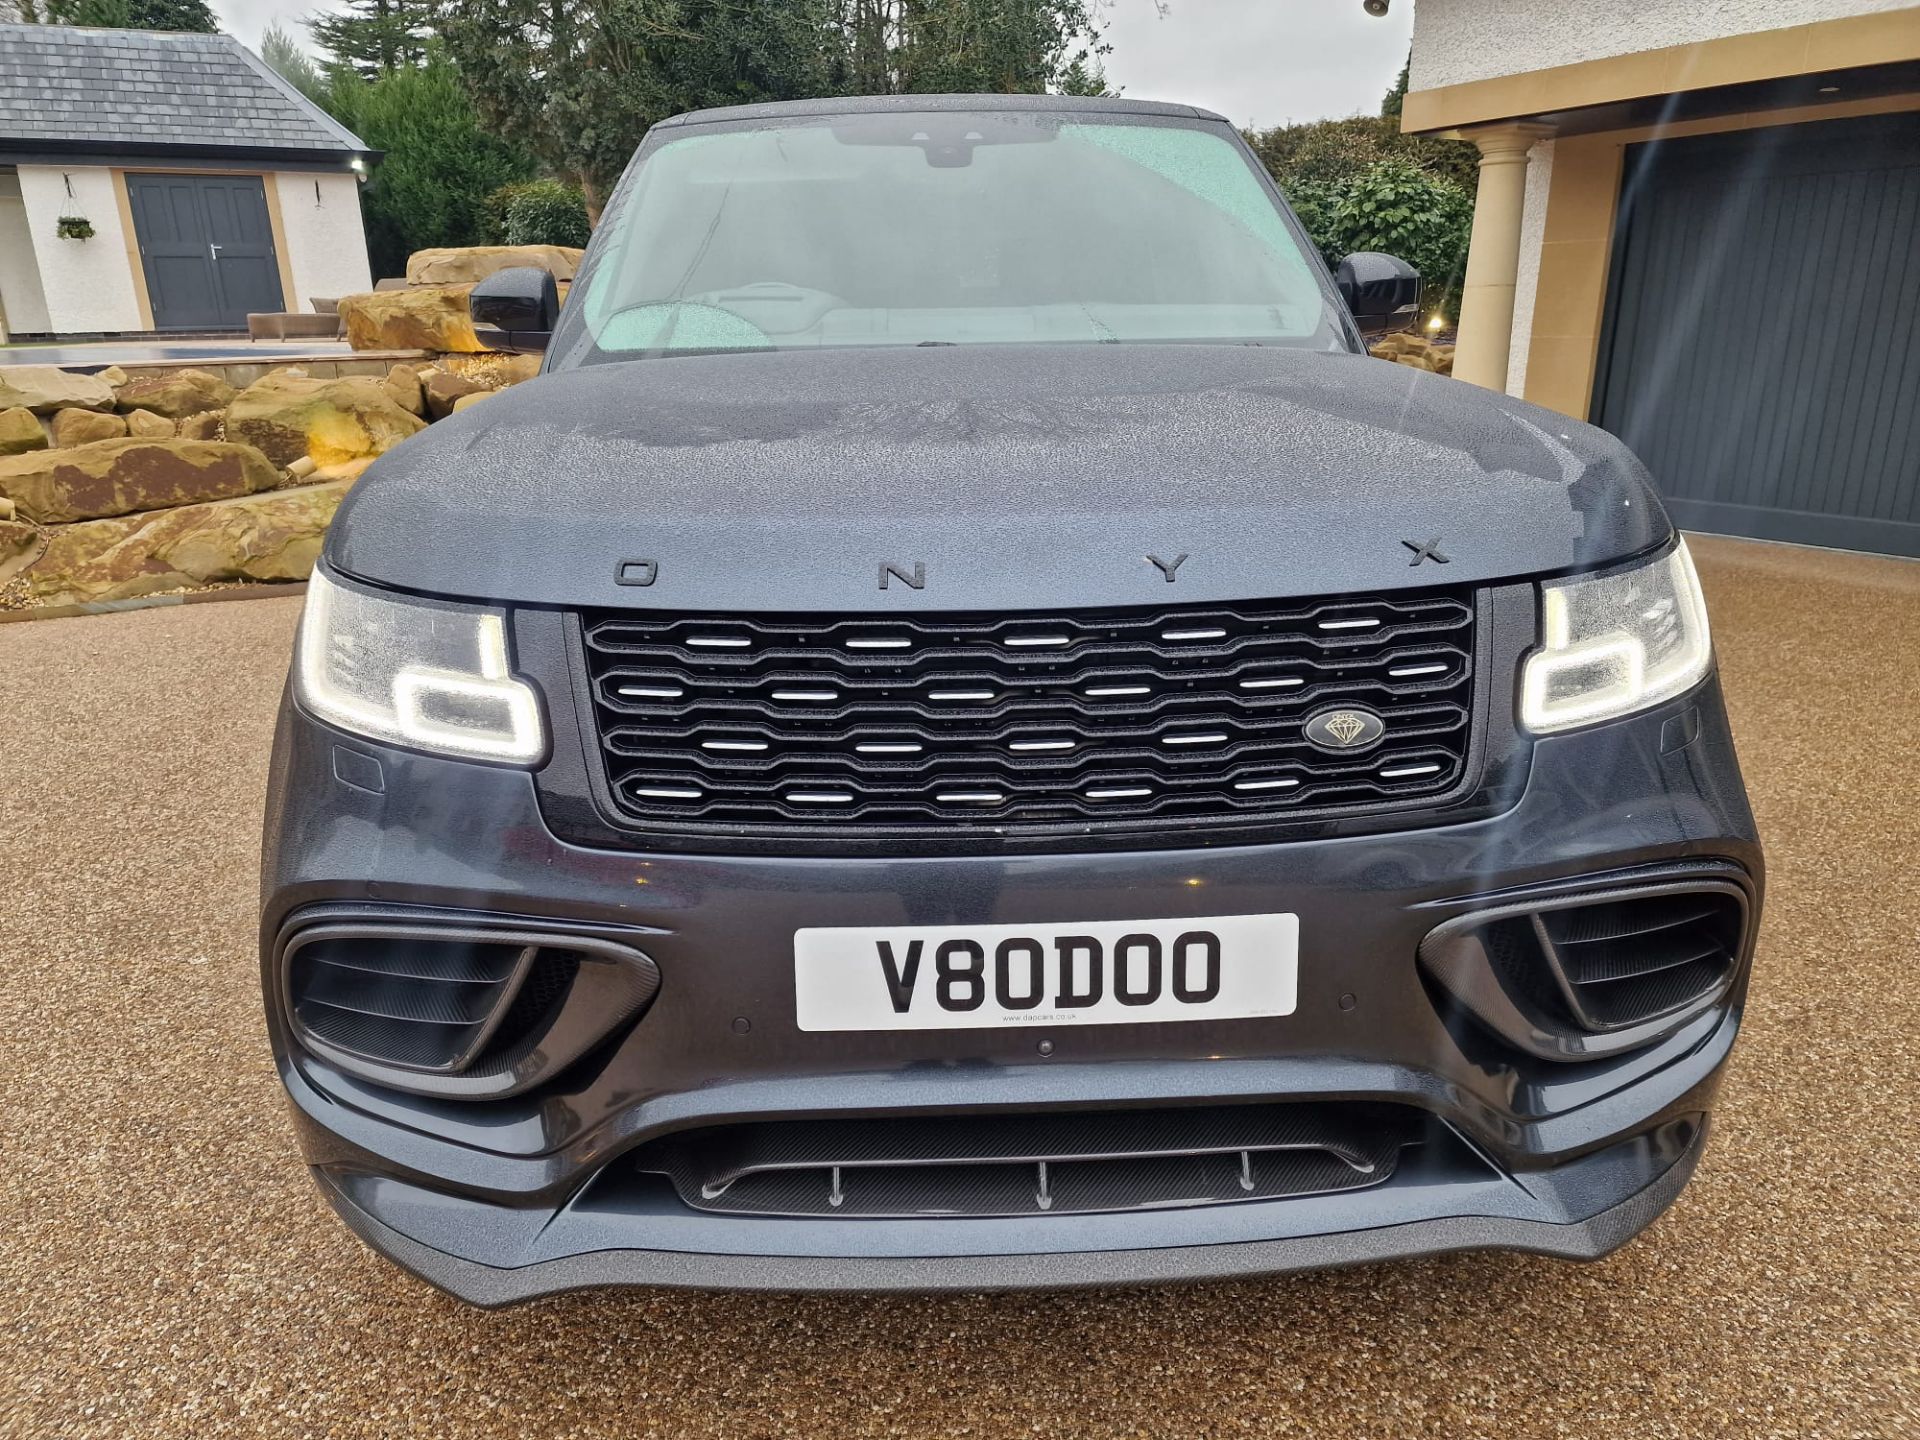 2018/68 RANGE ROVER SV AUTOBIOGRAPHY DYN V8 SC AUTO - £40K WORTH OF ONYX BODY KIT AND CONVERSION - Image 7 of 77